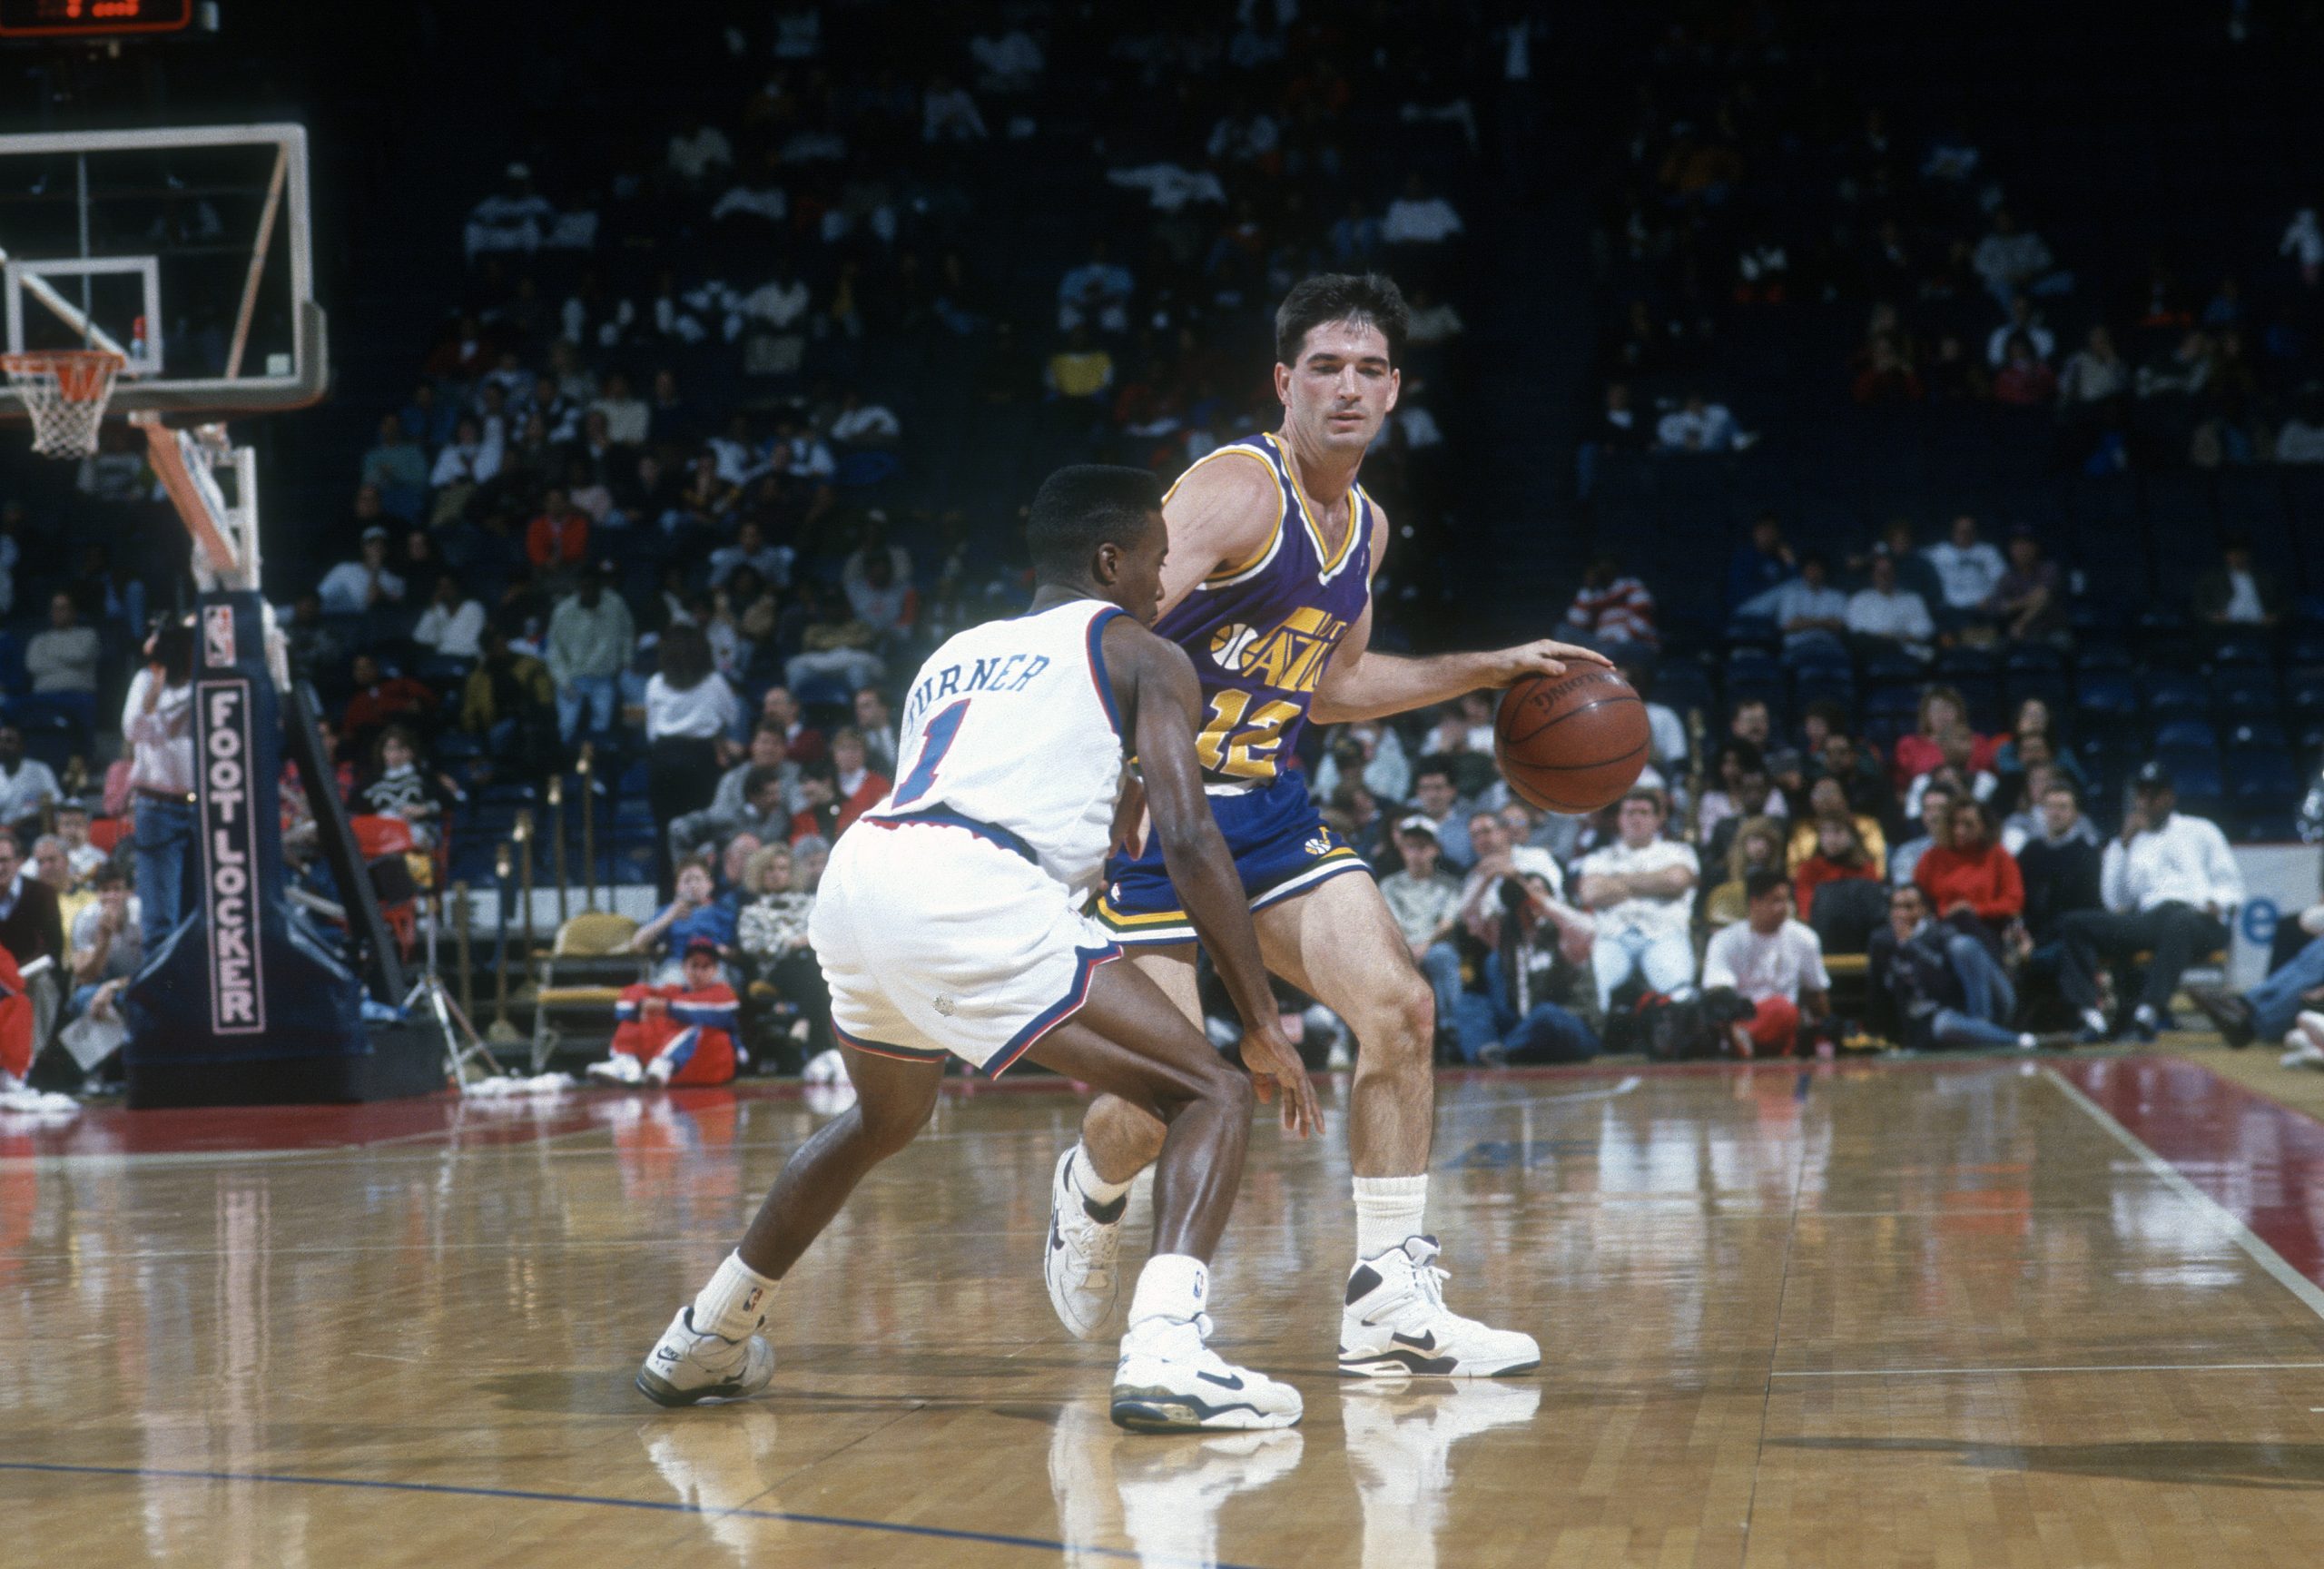 John Stockton of the Utah Jazz is defended by Andre Turner of the Washington Bullets during an NBA basketball game circa 1991.